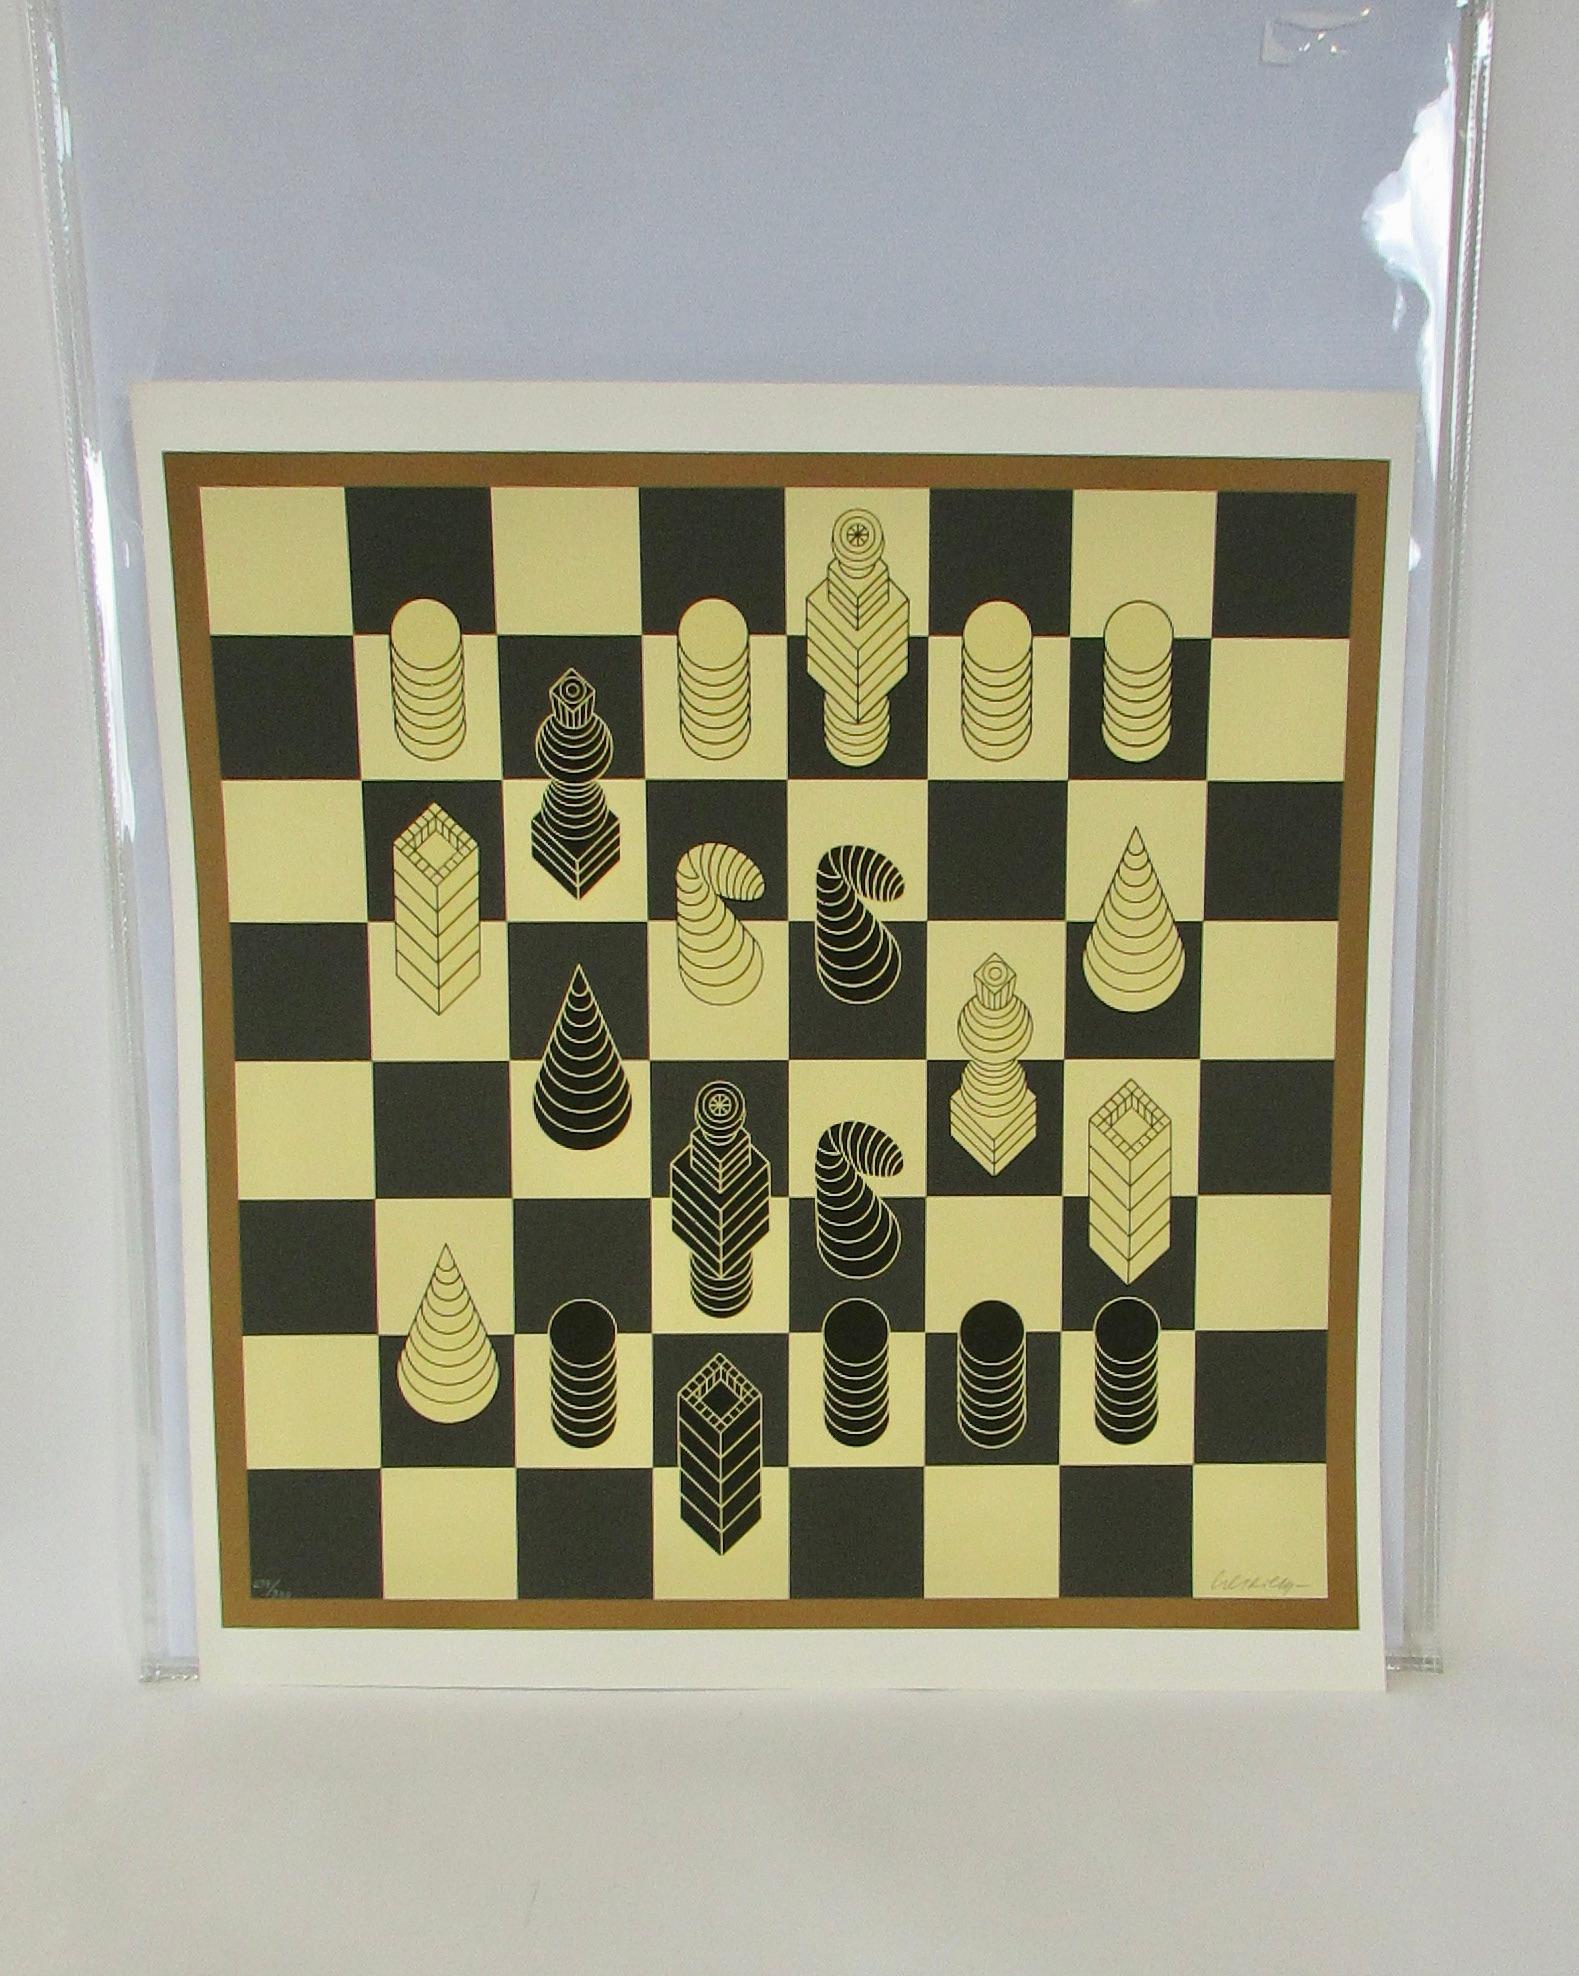 Victor Vasarely (French/Hungarian, 1906-1997) Serigraph In Colors On Wove Paper, C. 1975, Chess, H 29'' W 29'' Signed in pencil and numbered 279/300.  Organic surrealist forms on a chess board . 
Unframed. Stamped on backside Circle Fine Art 1988